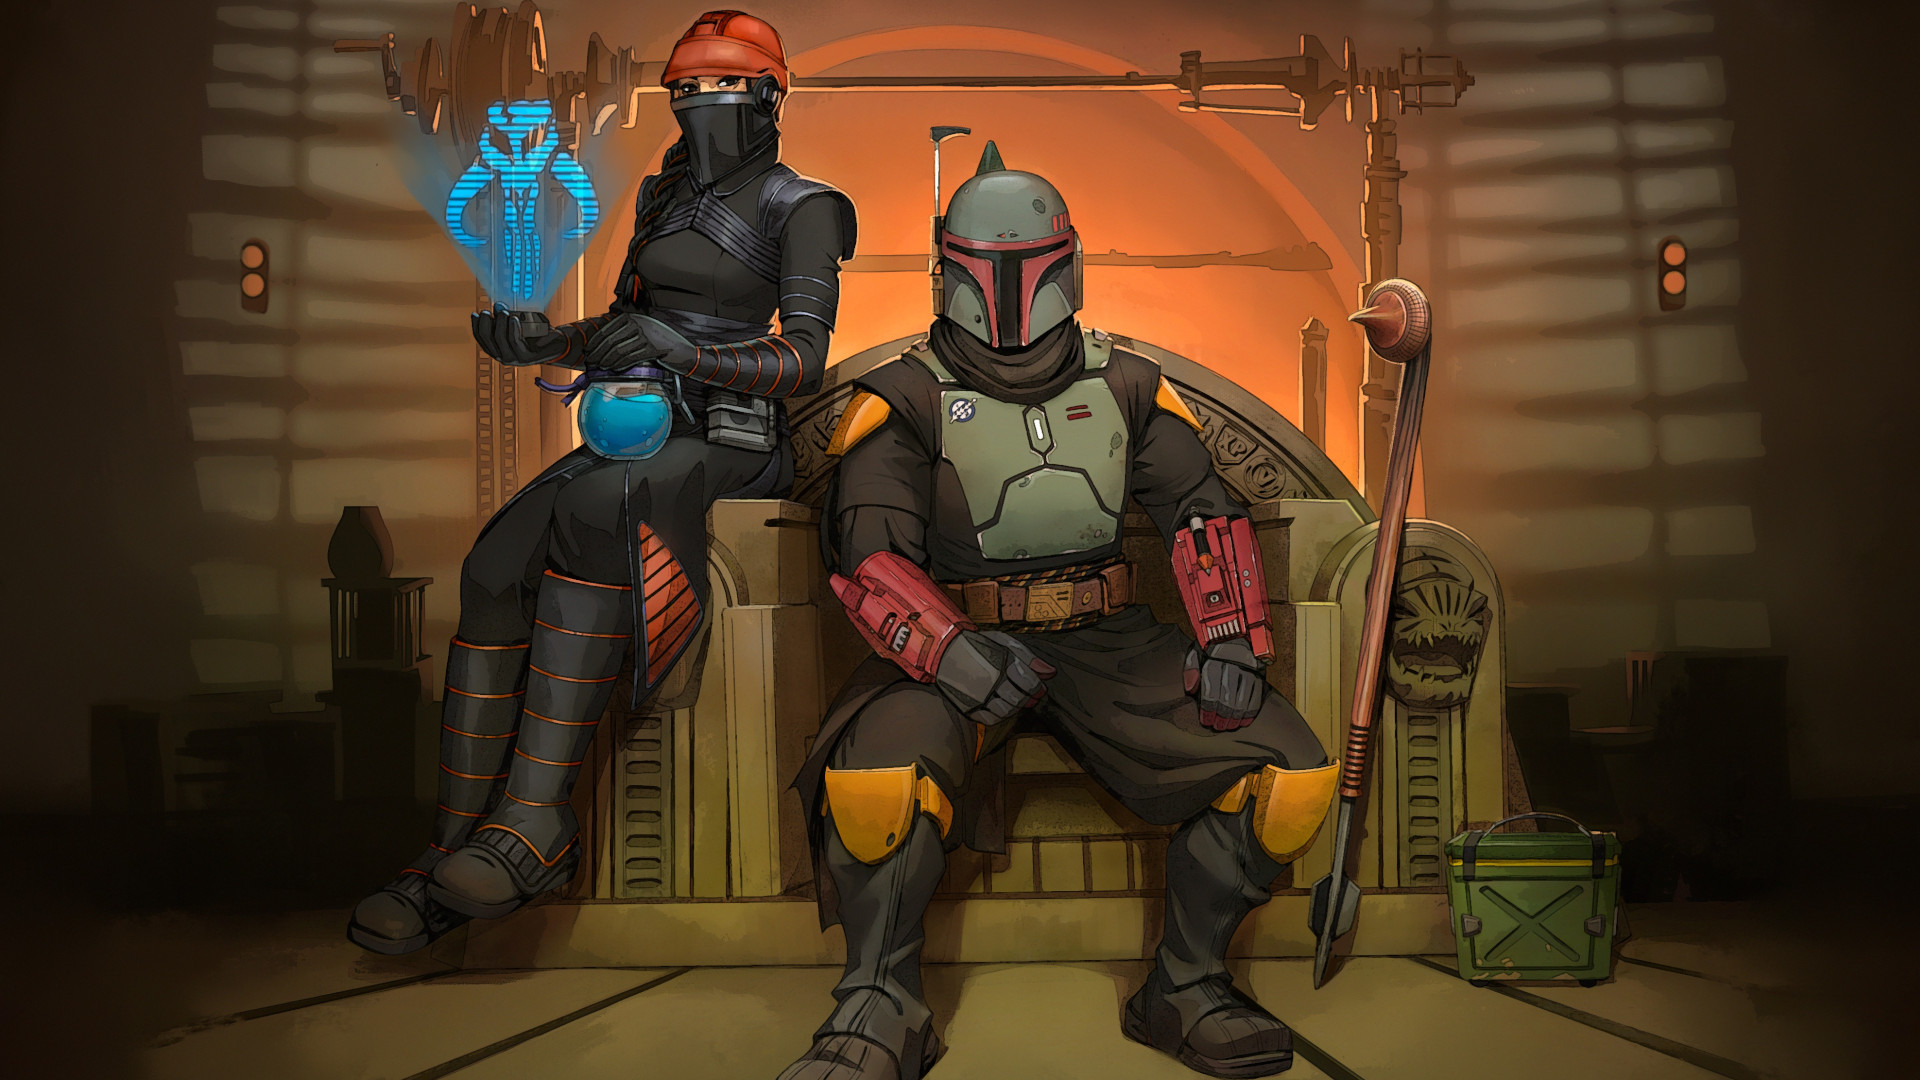 Boba Fett officially comes to Fortnite on Christmas Eve